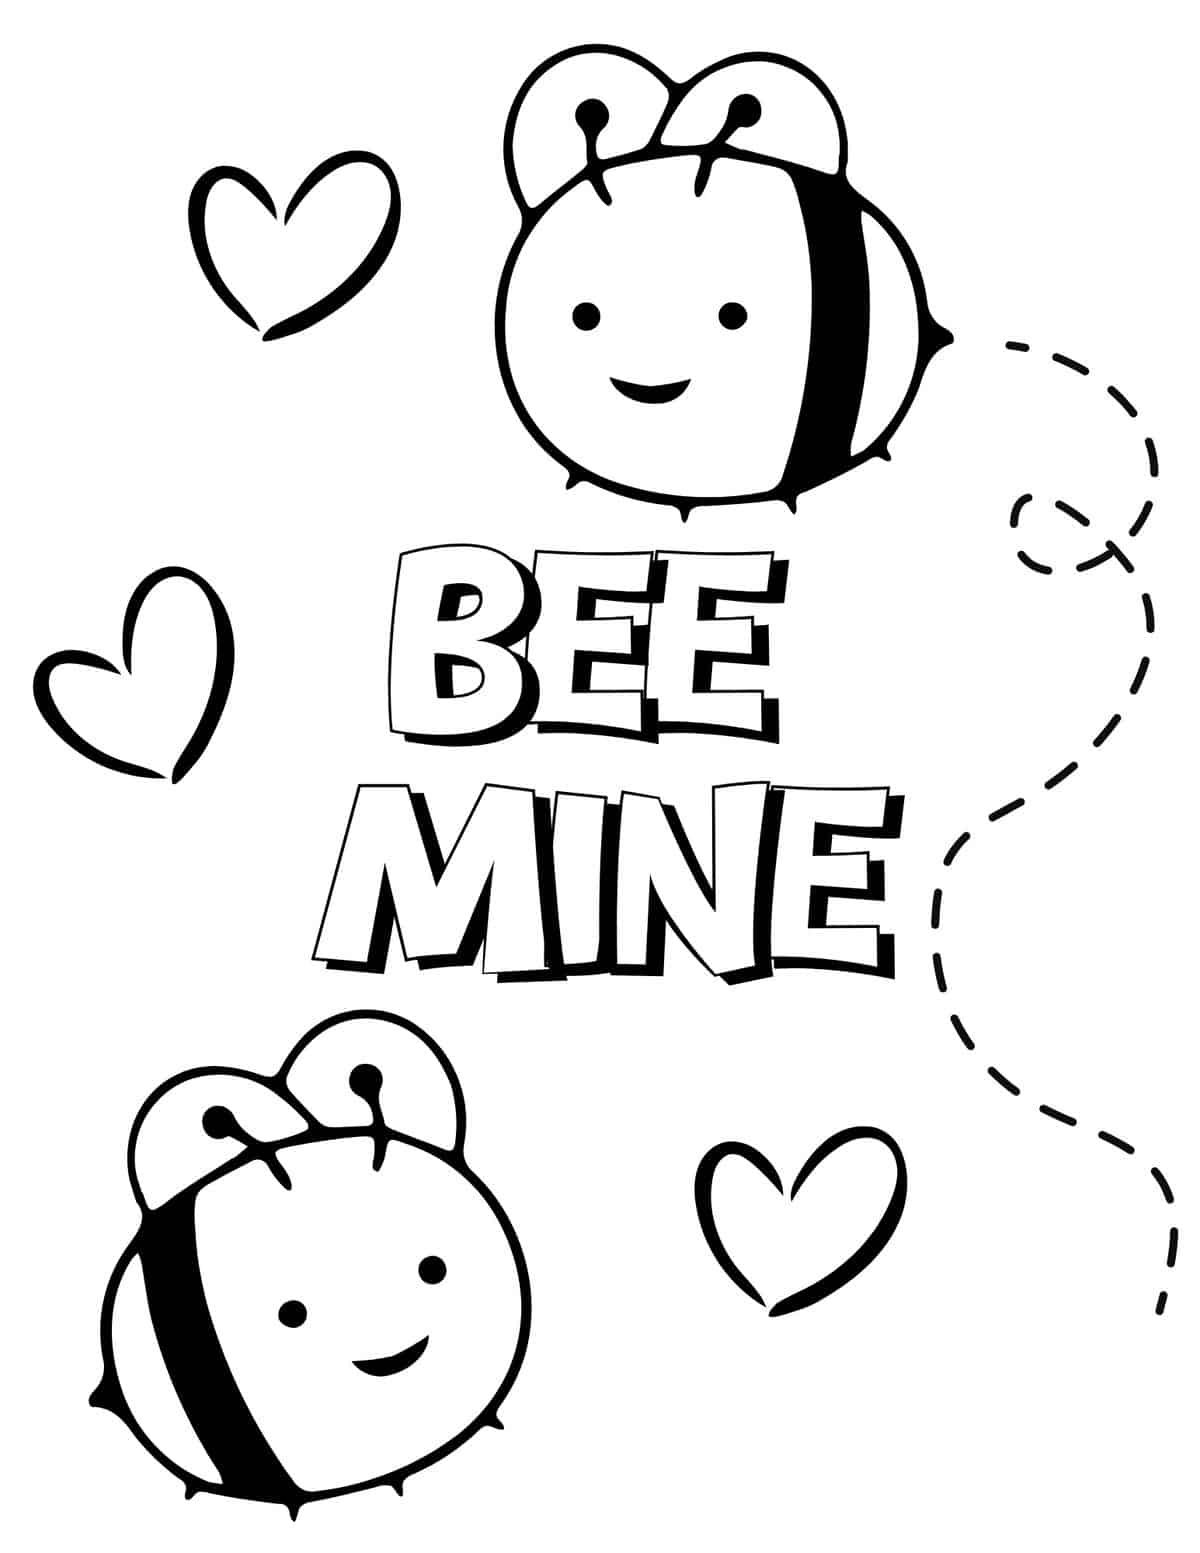 bee mine Valentine's Day coloring page